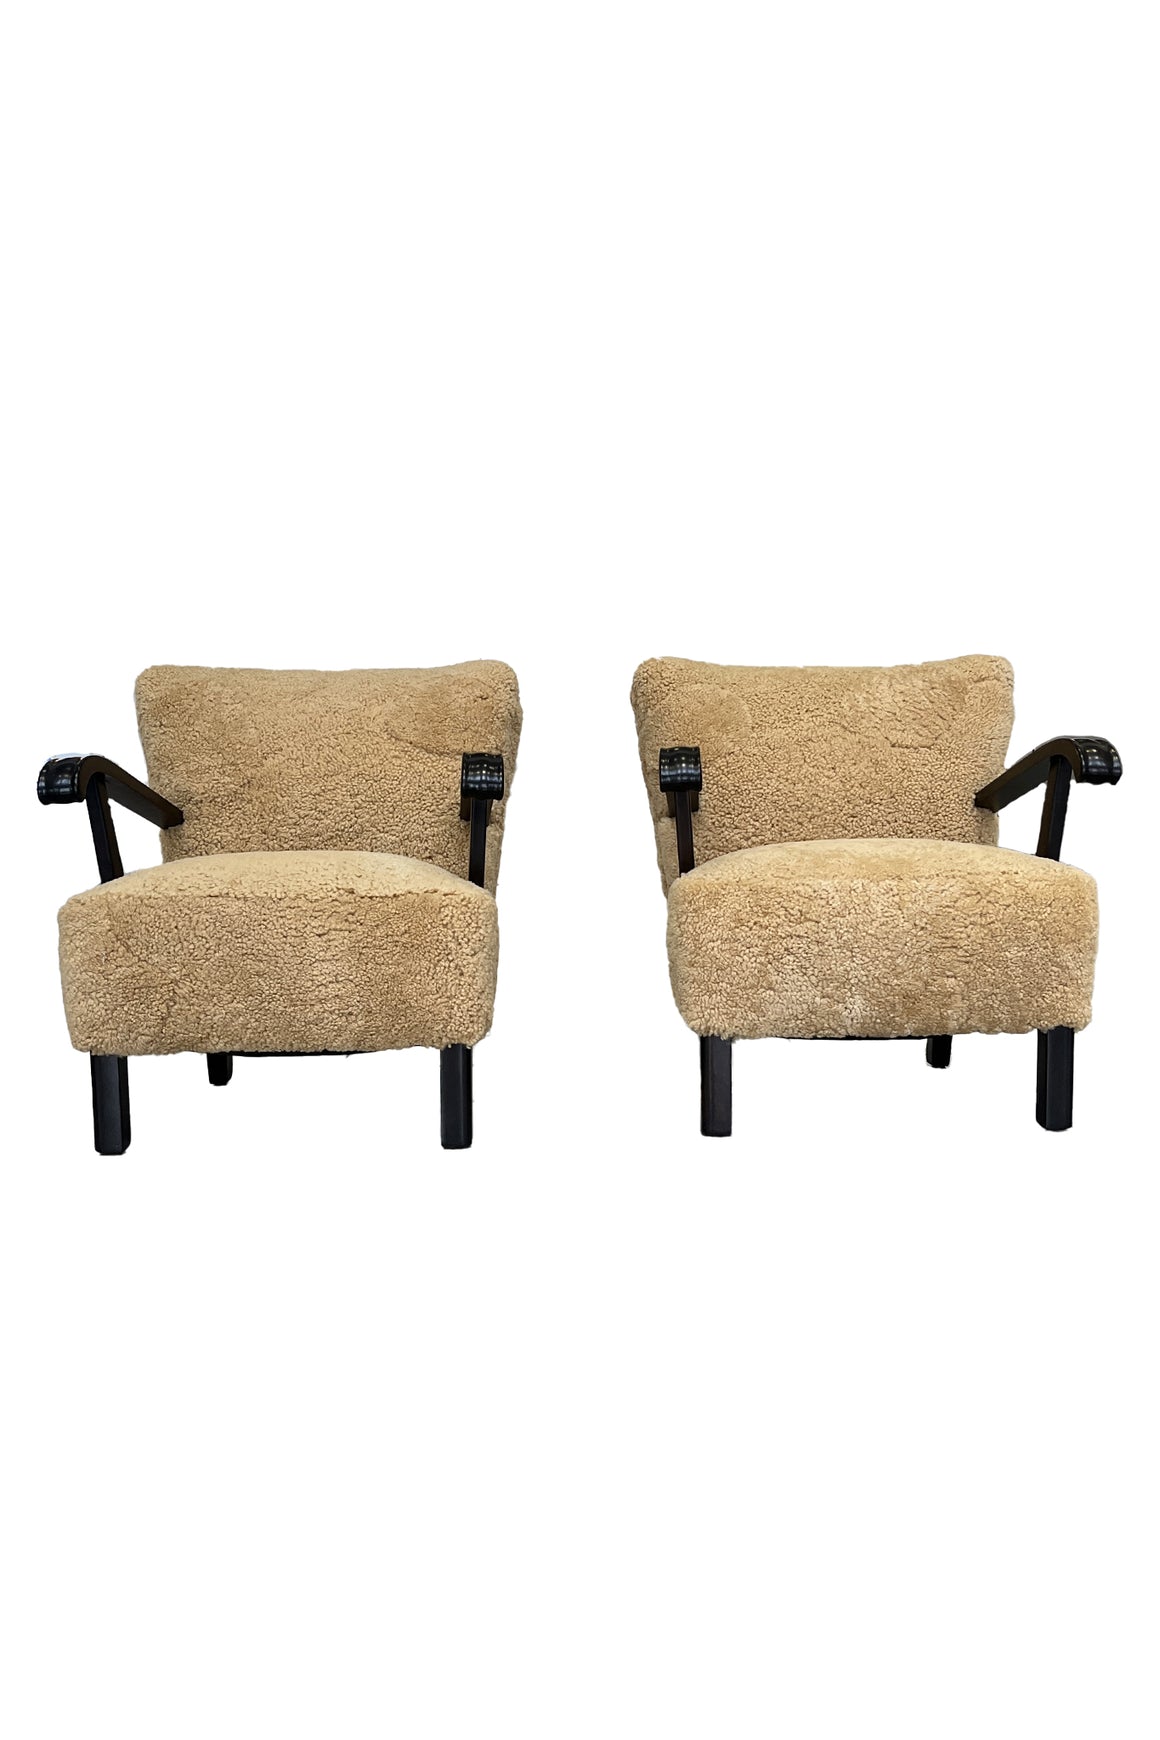 Pair of Shearling Armchairs by Alfred Christensen